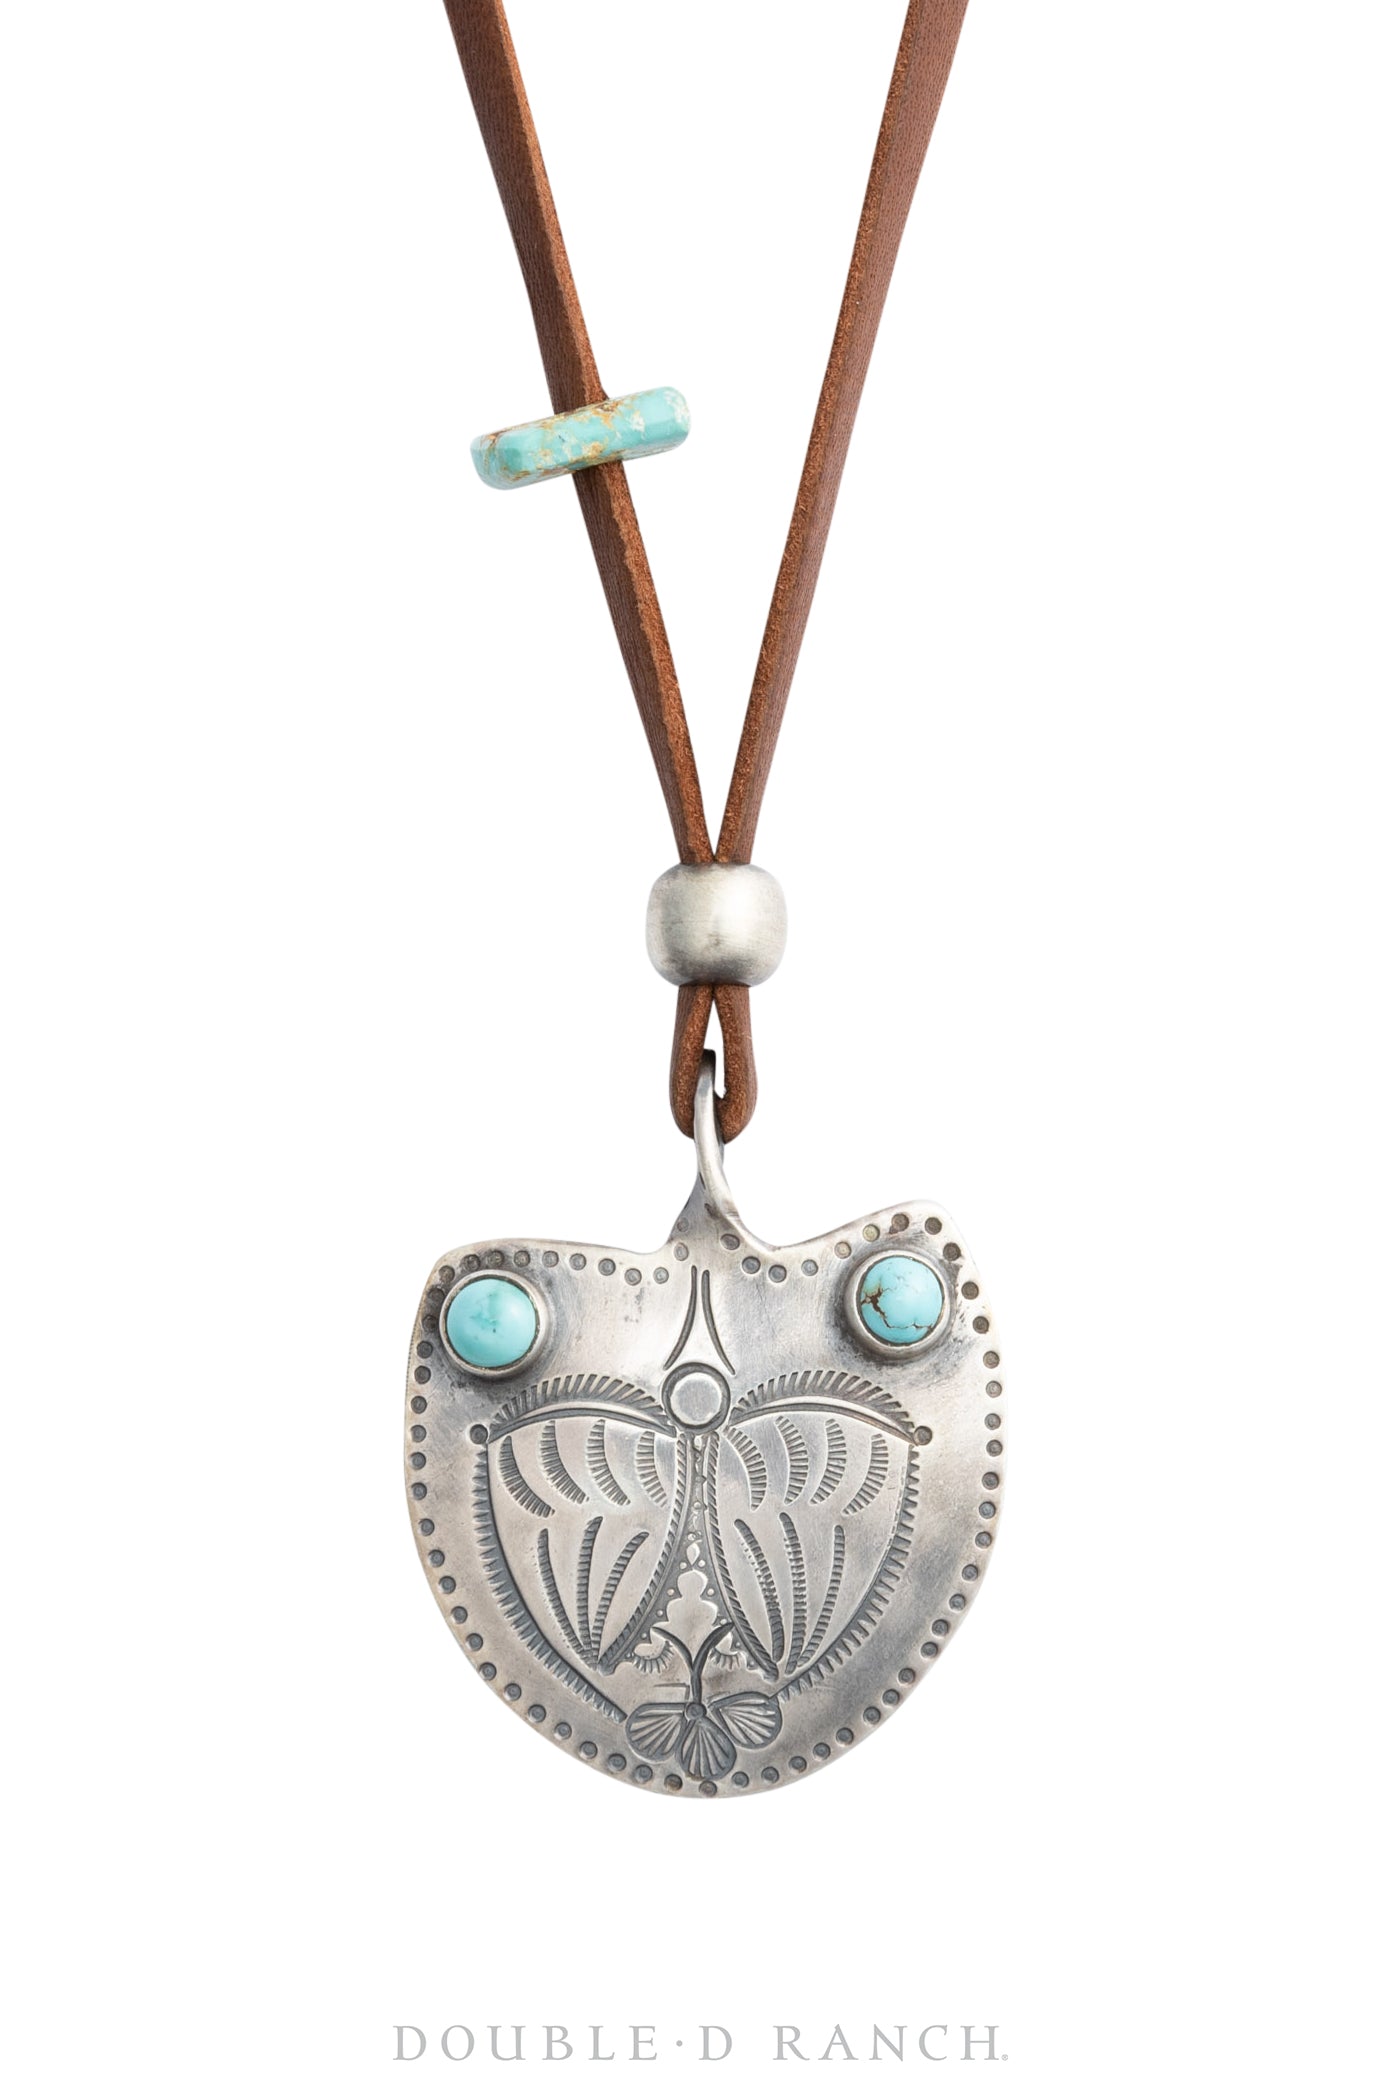 Necklace, Leather Thong, Turquoise, Jesse Robbins Hallmark, Artisan, Contemporary, 1887